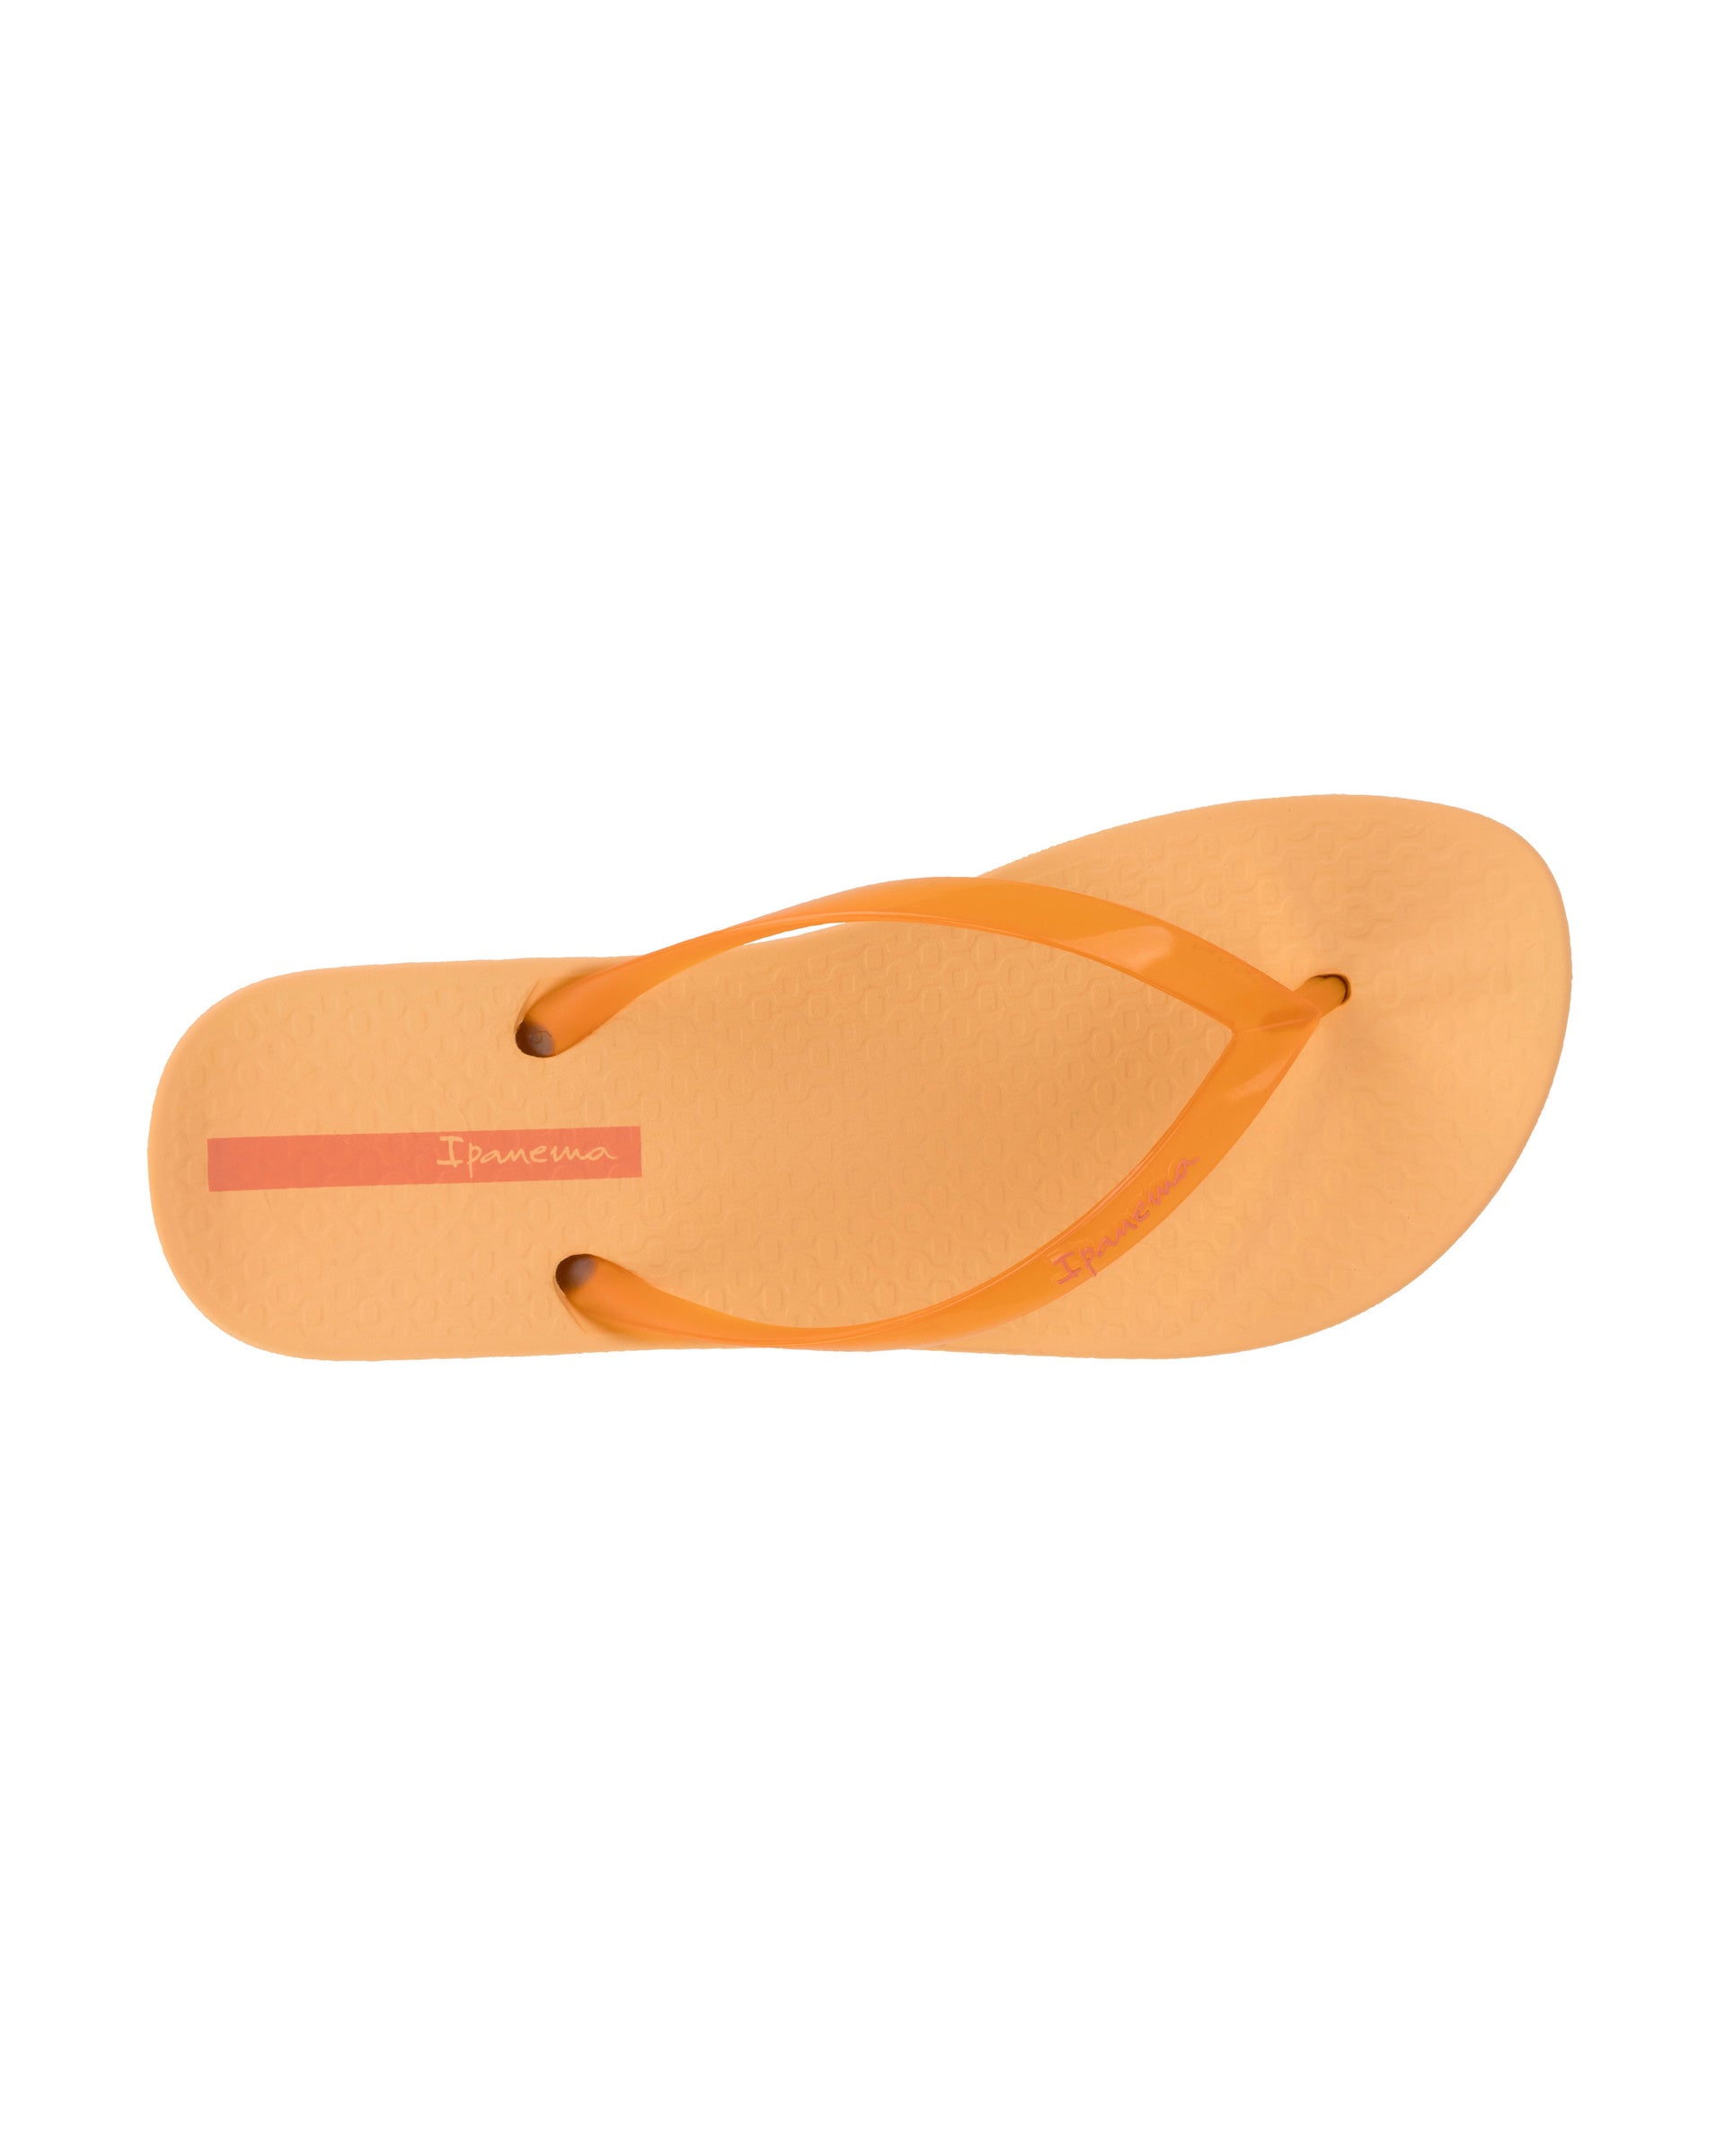 Top view of a orange Ipanema Ana Connect women's flip flop with a clear orange strap.